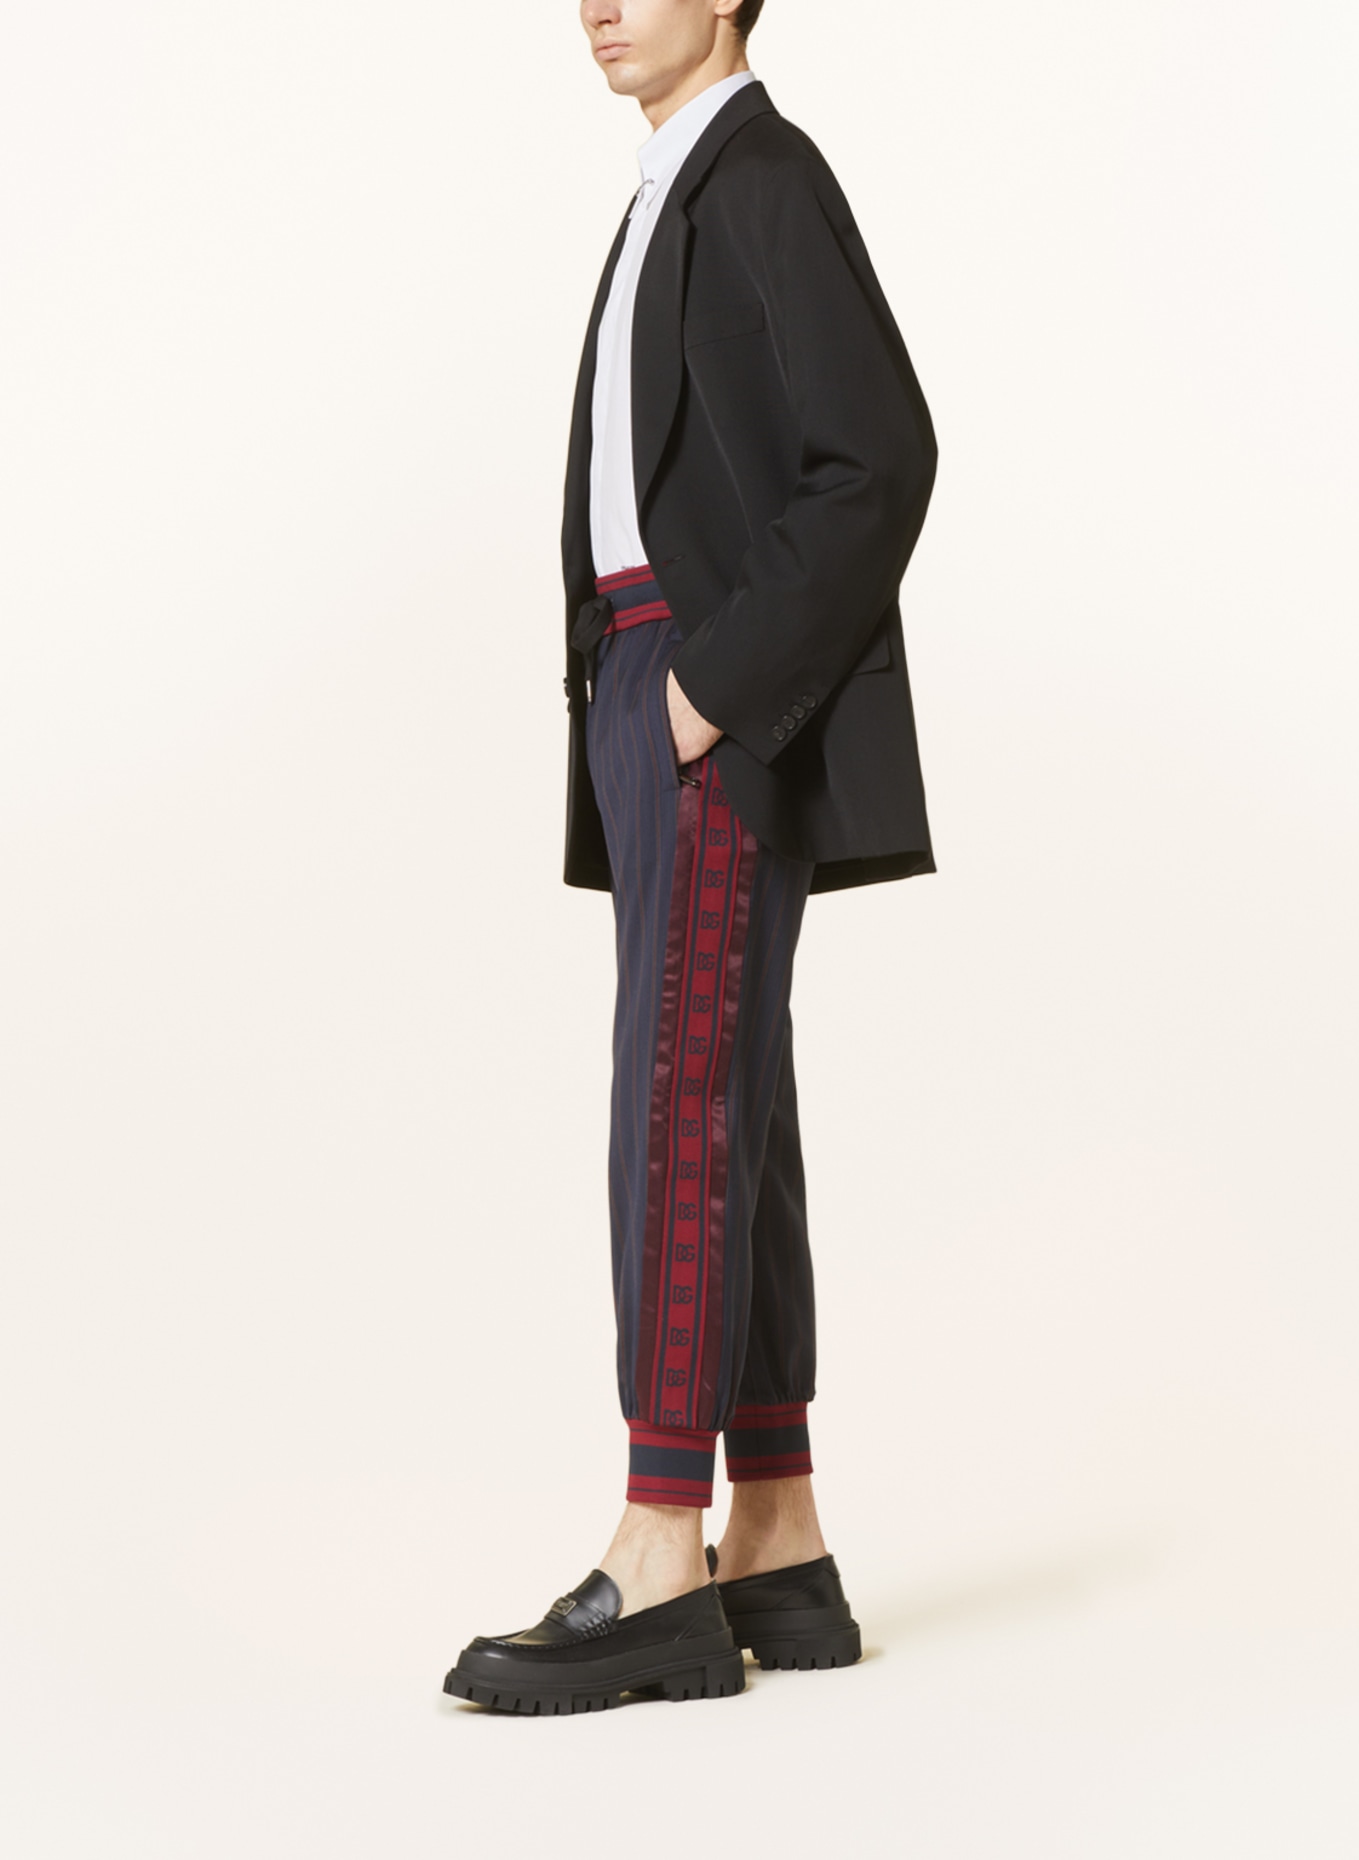 DOLCE & GABBANA Pants in jogger style with tuxedo stripes in black/ dark red